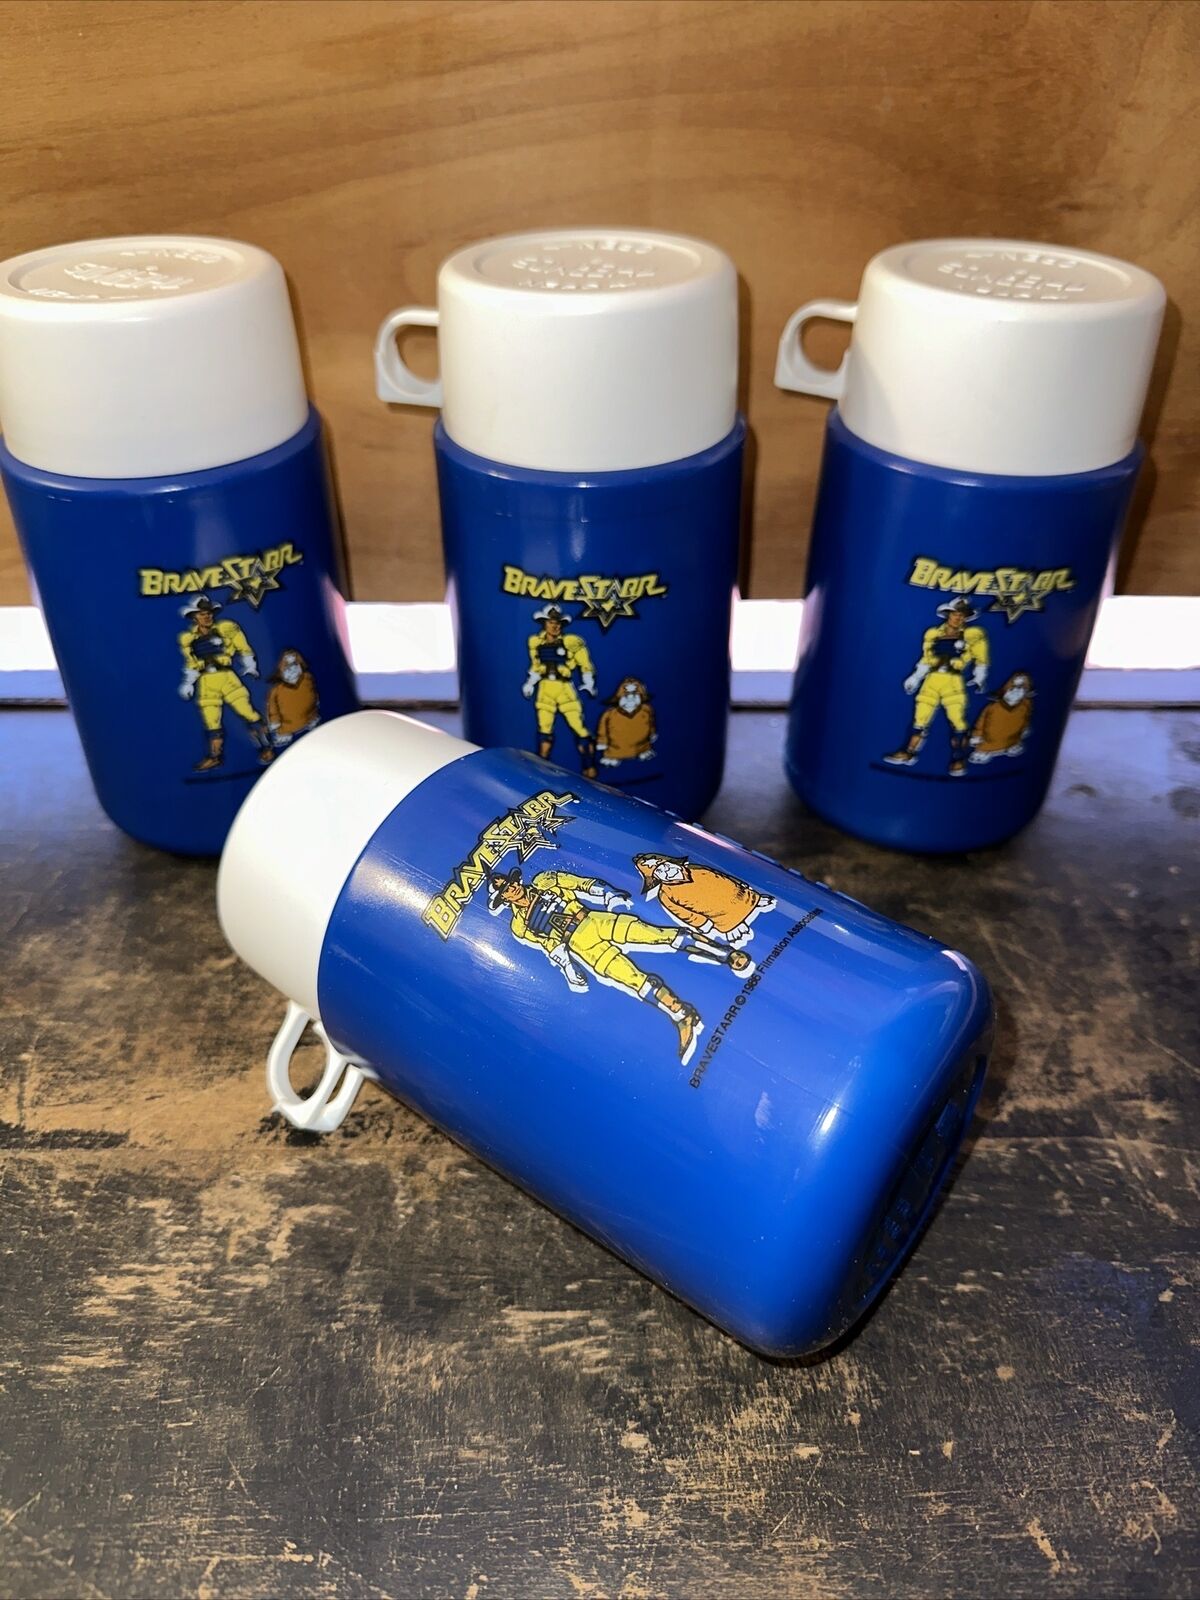 4 Vintage Bravestar Thermoses 1986 Brave Star New Old Stock Thermos